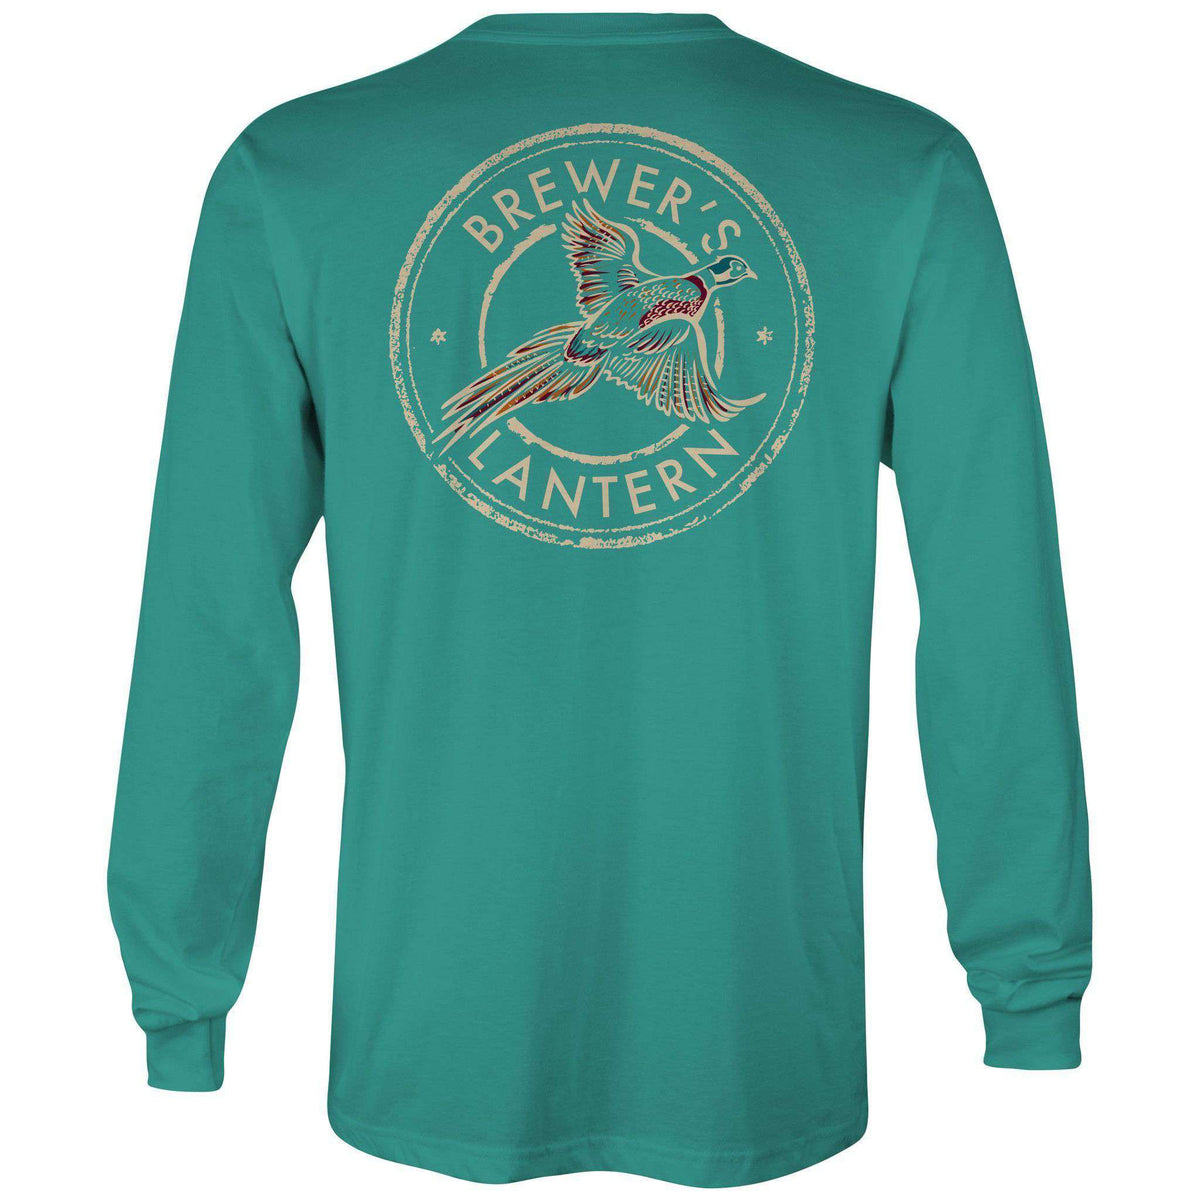 Arthur's Pheasant Long Sleeve Tee in Highlands Green by Brewer's Lantern - Country Club Prep